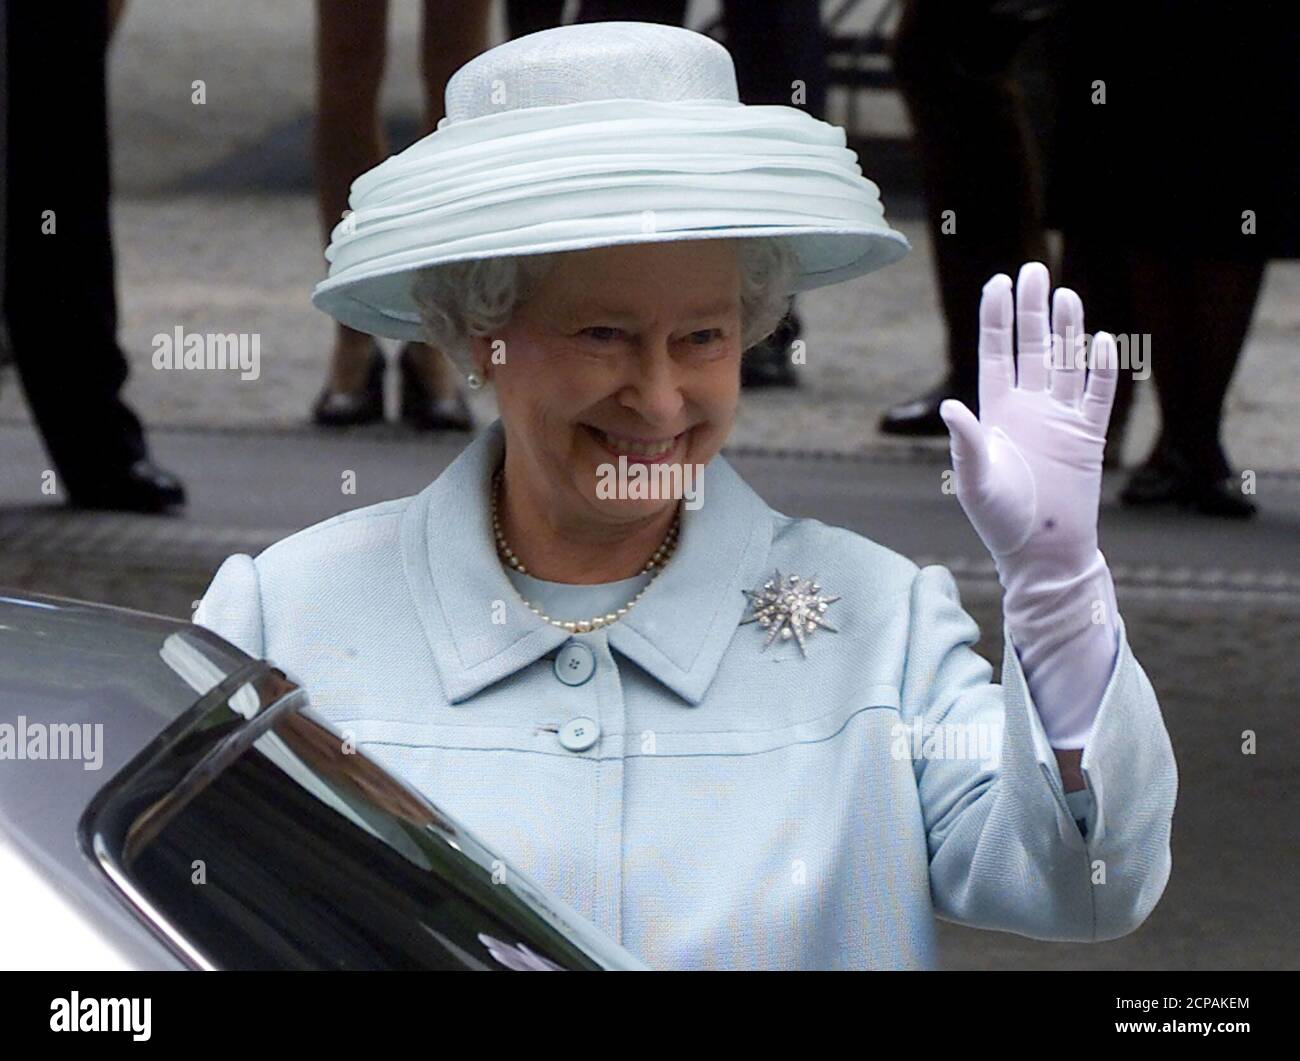 British Queen Elizabeth waves to well wishers as she leaves the new British embassy after an opening ceremony in Berlin July 18. The new embassy designed by British architect Michael Wilford is based on the same site as the old building which was destroyed by Allied bombers in World War Two.  MUR Stock Photo